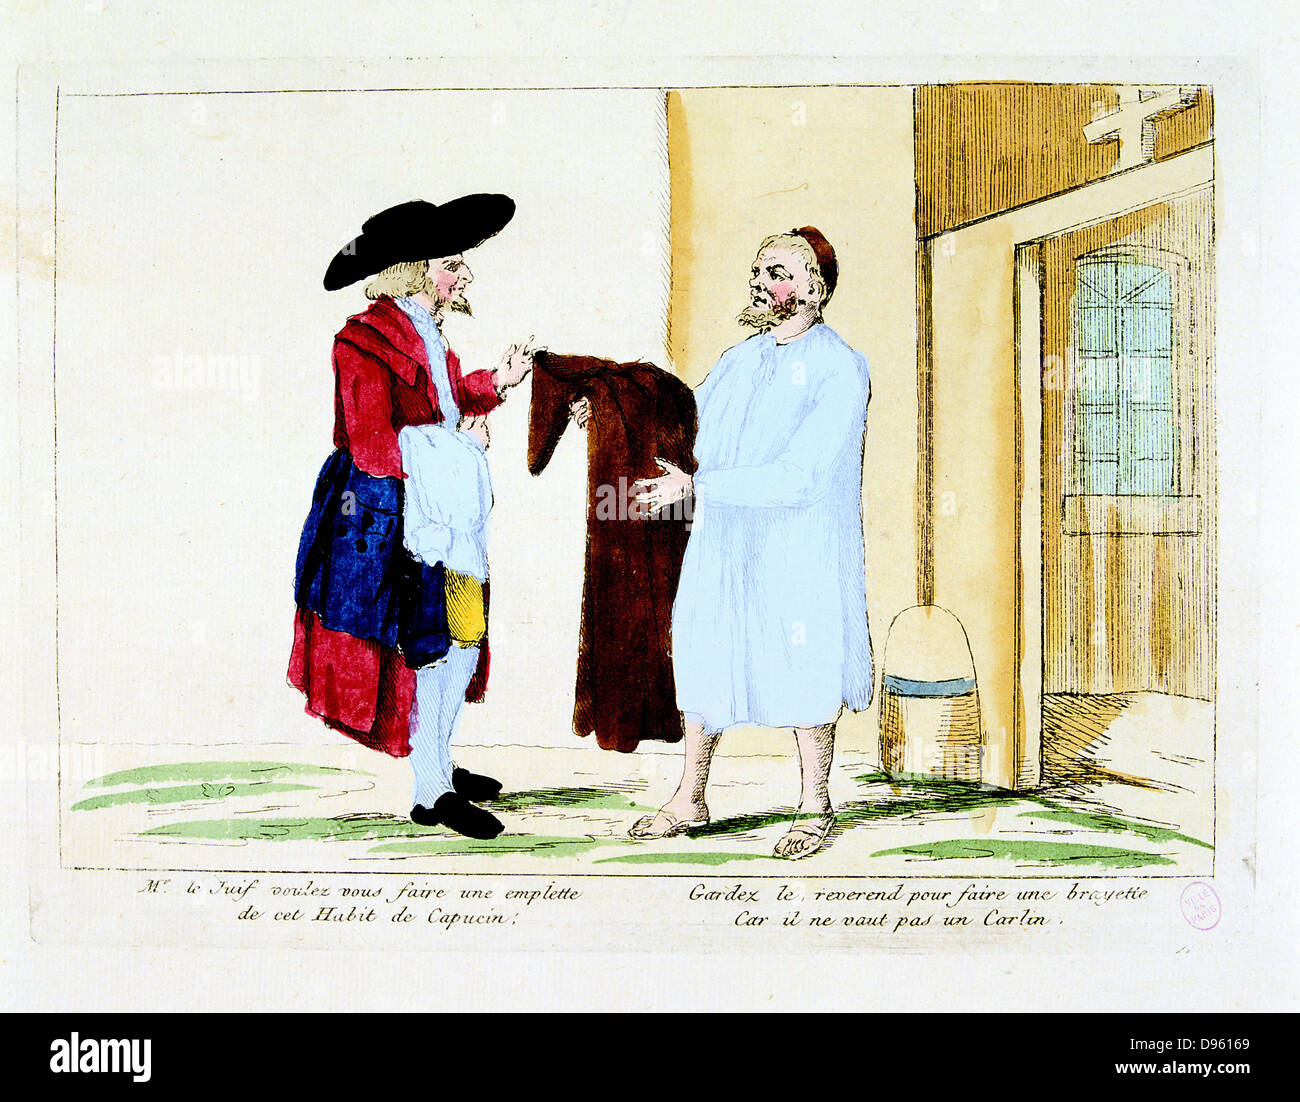 French Revolution 1789. Suppression of religious orders: a Capuchin Friar disposing of his habit to a Jewish second-hand clothes dealer. 18th century coloured engraving. Carnavalet, Paris. Stock Photo